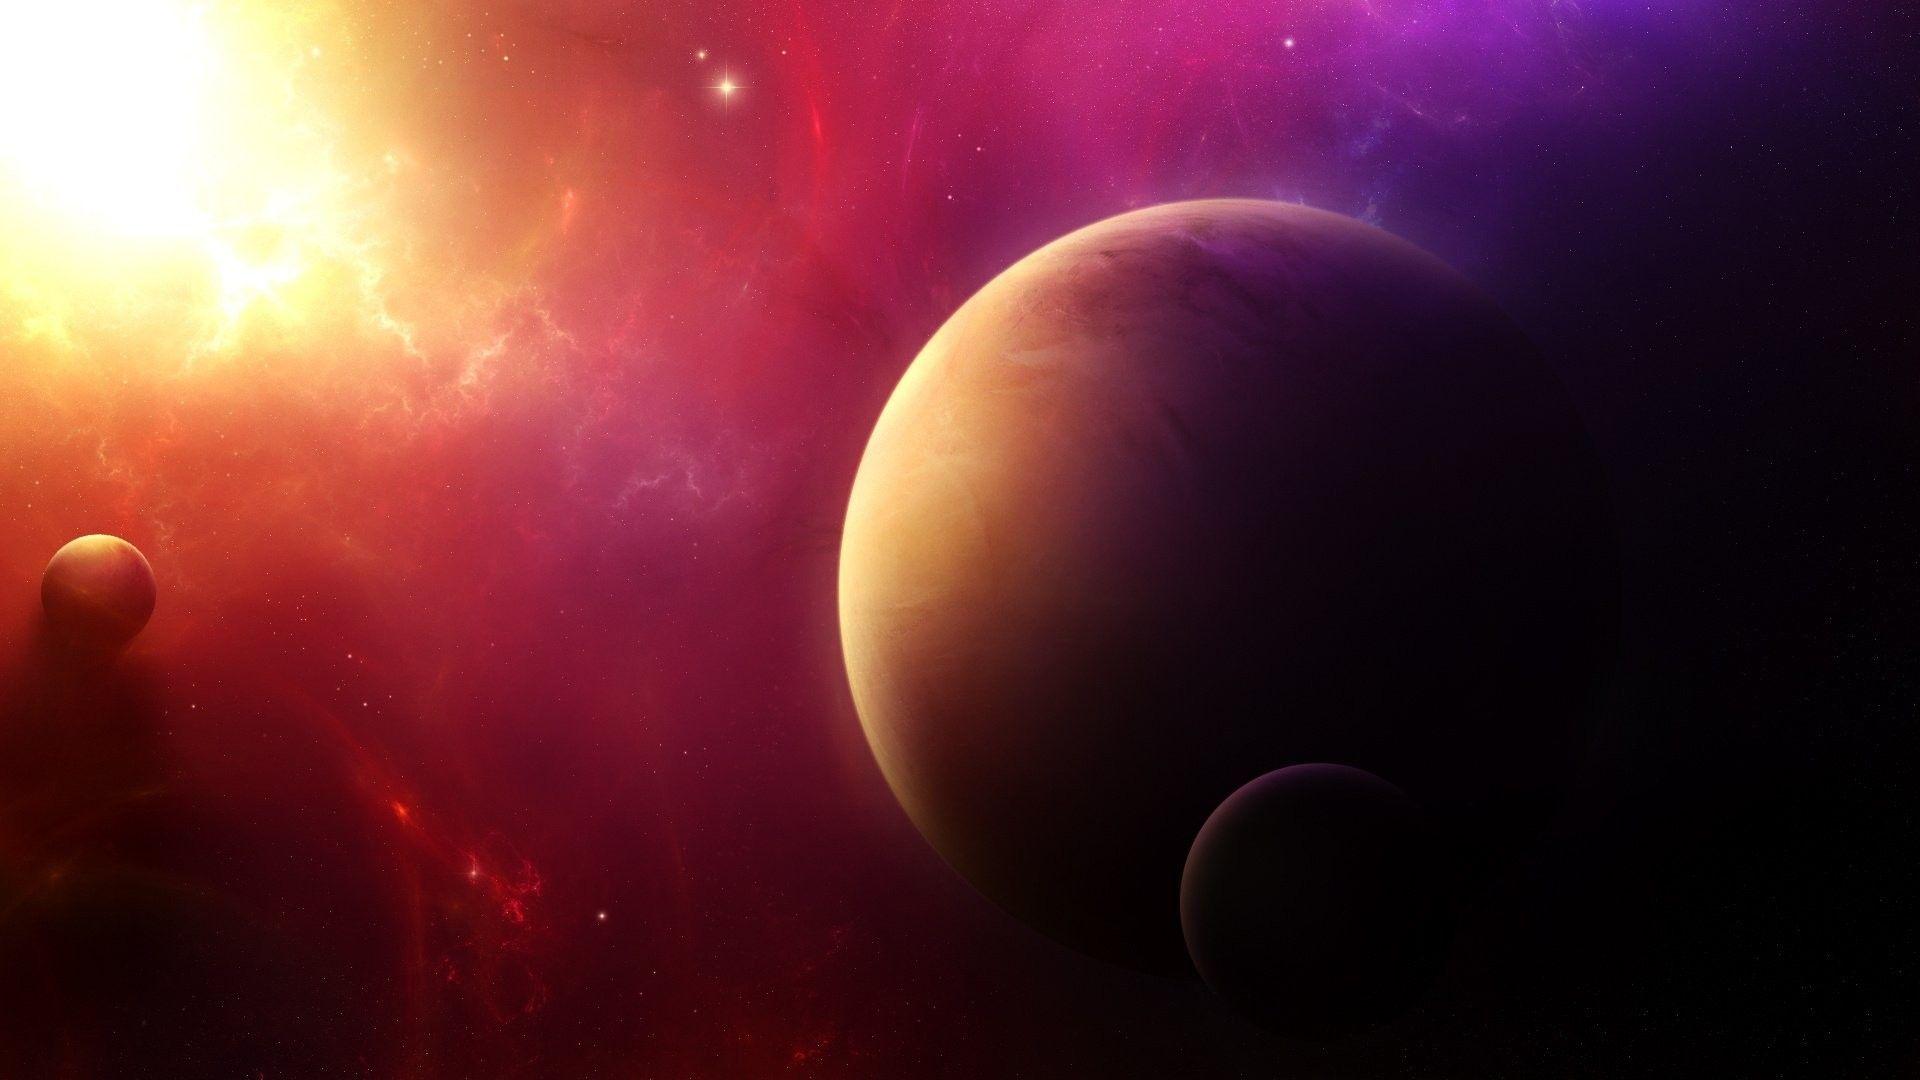 Cosmos Universe Wallpapers - Top Free Cosmos Universe Backgrounds